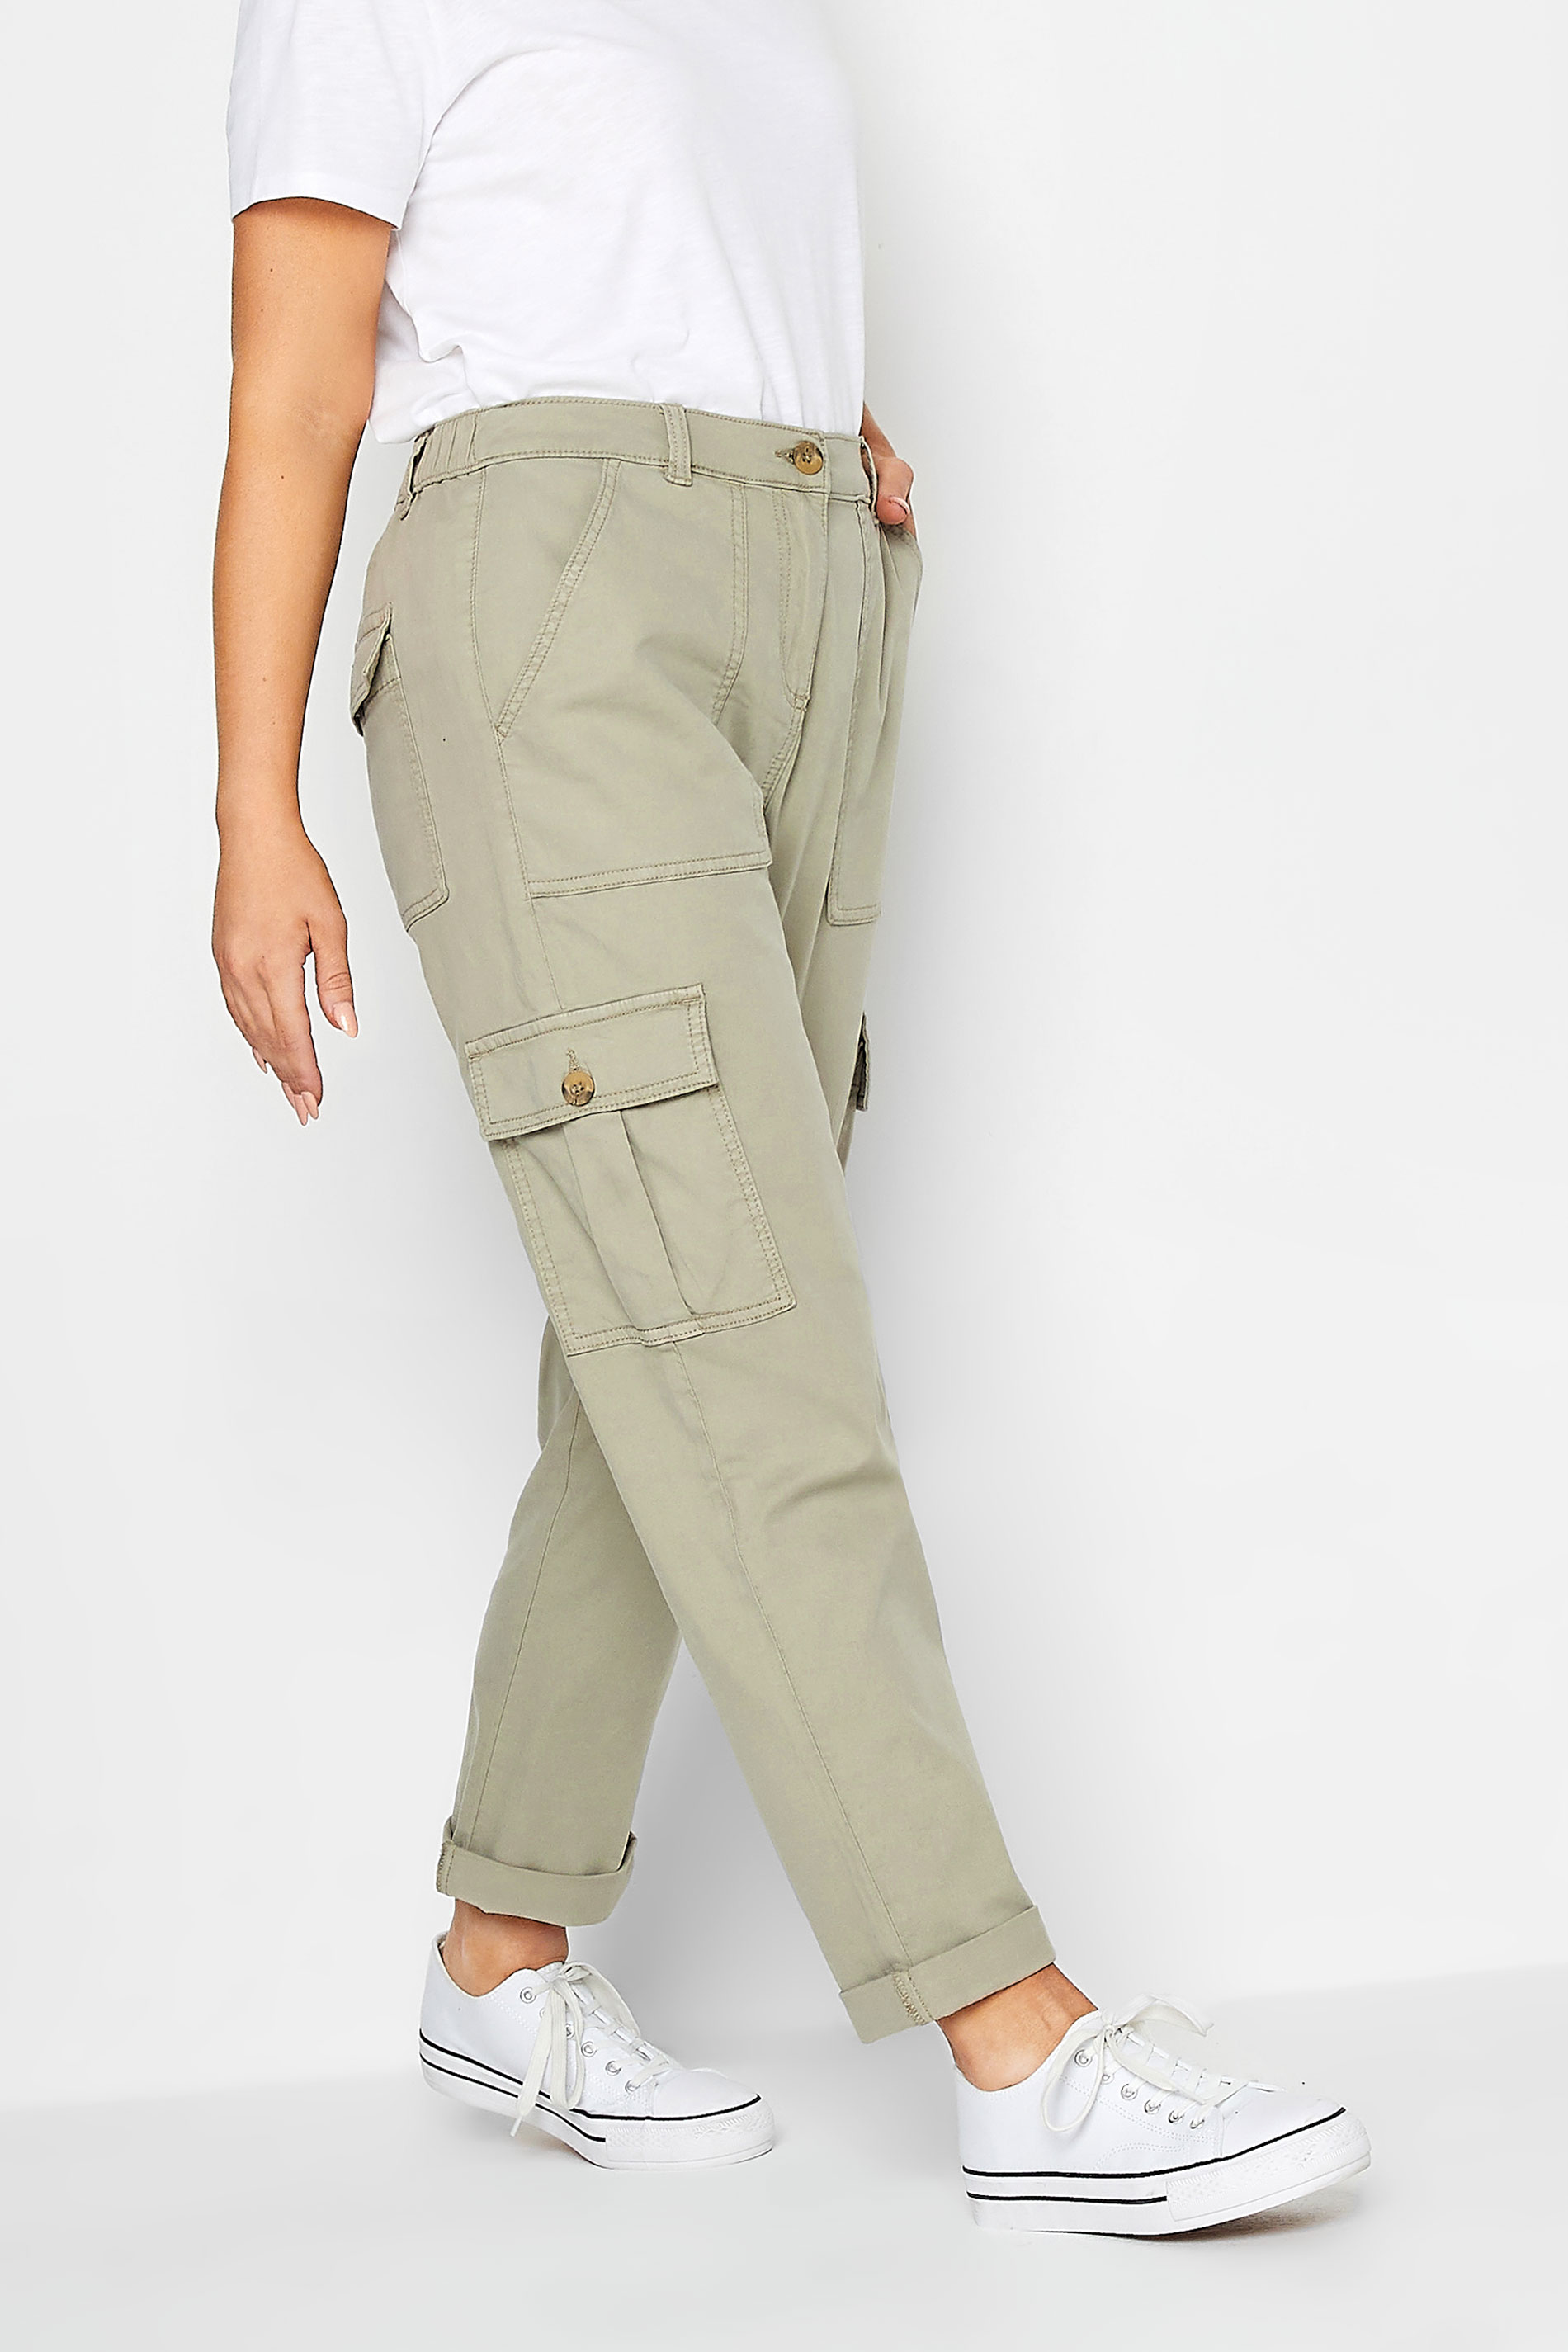 Pockets For Women - Superdry Ladies Embroidered Slim Cargo Trousers, Khaki,